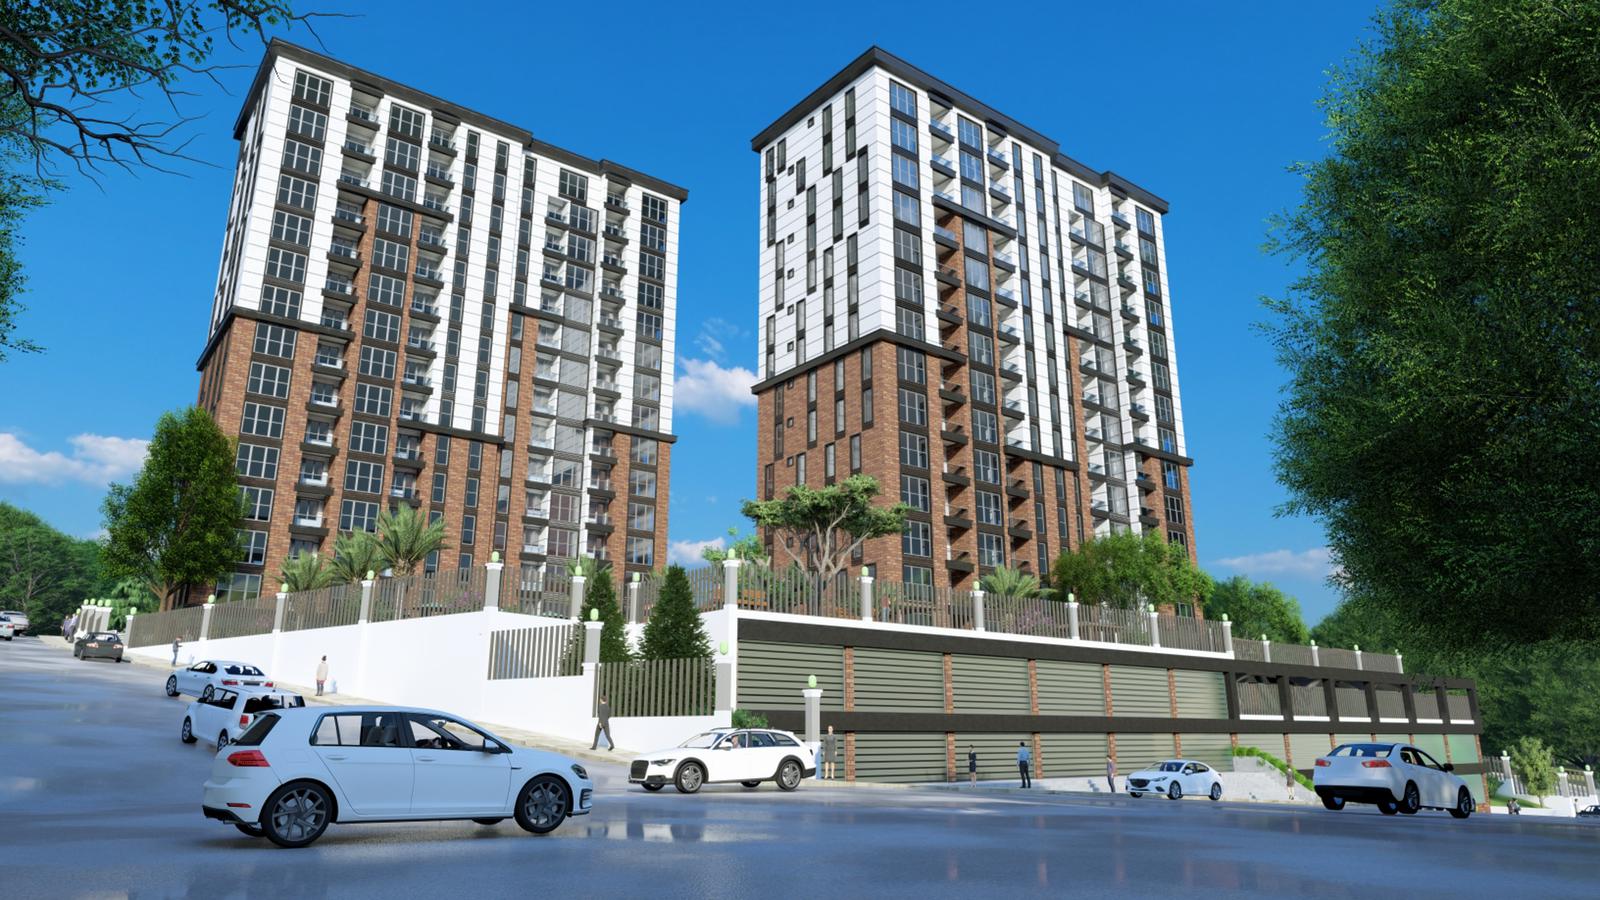 Project is located in the Kartal district in the Asian section of Istanbul